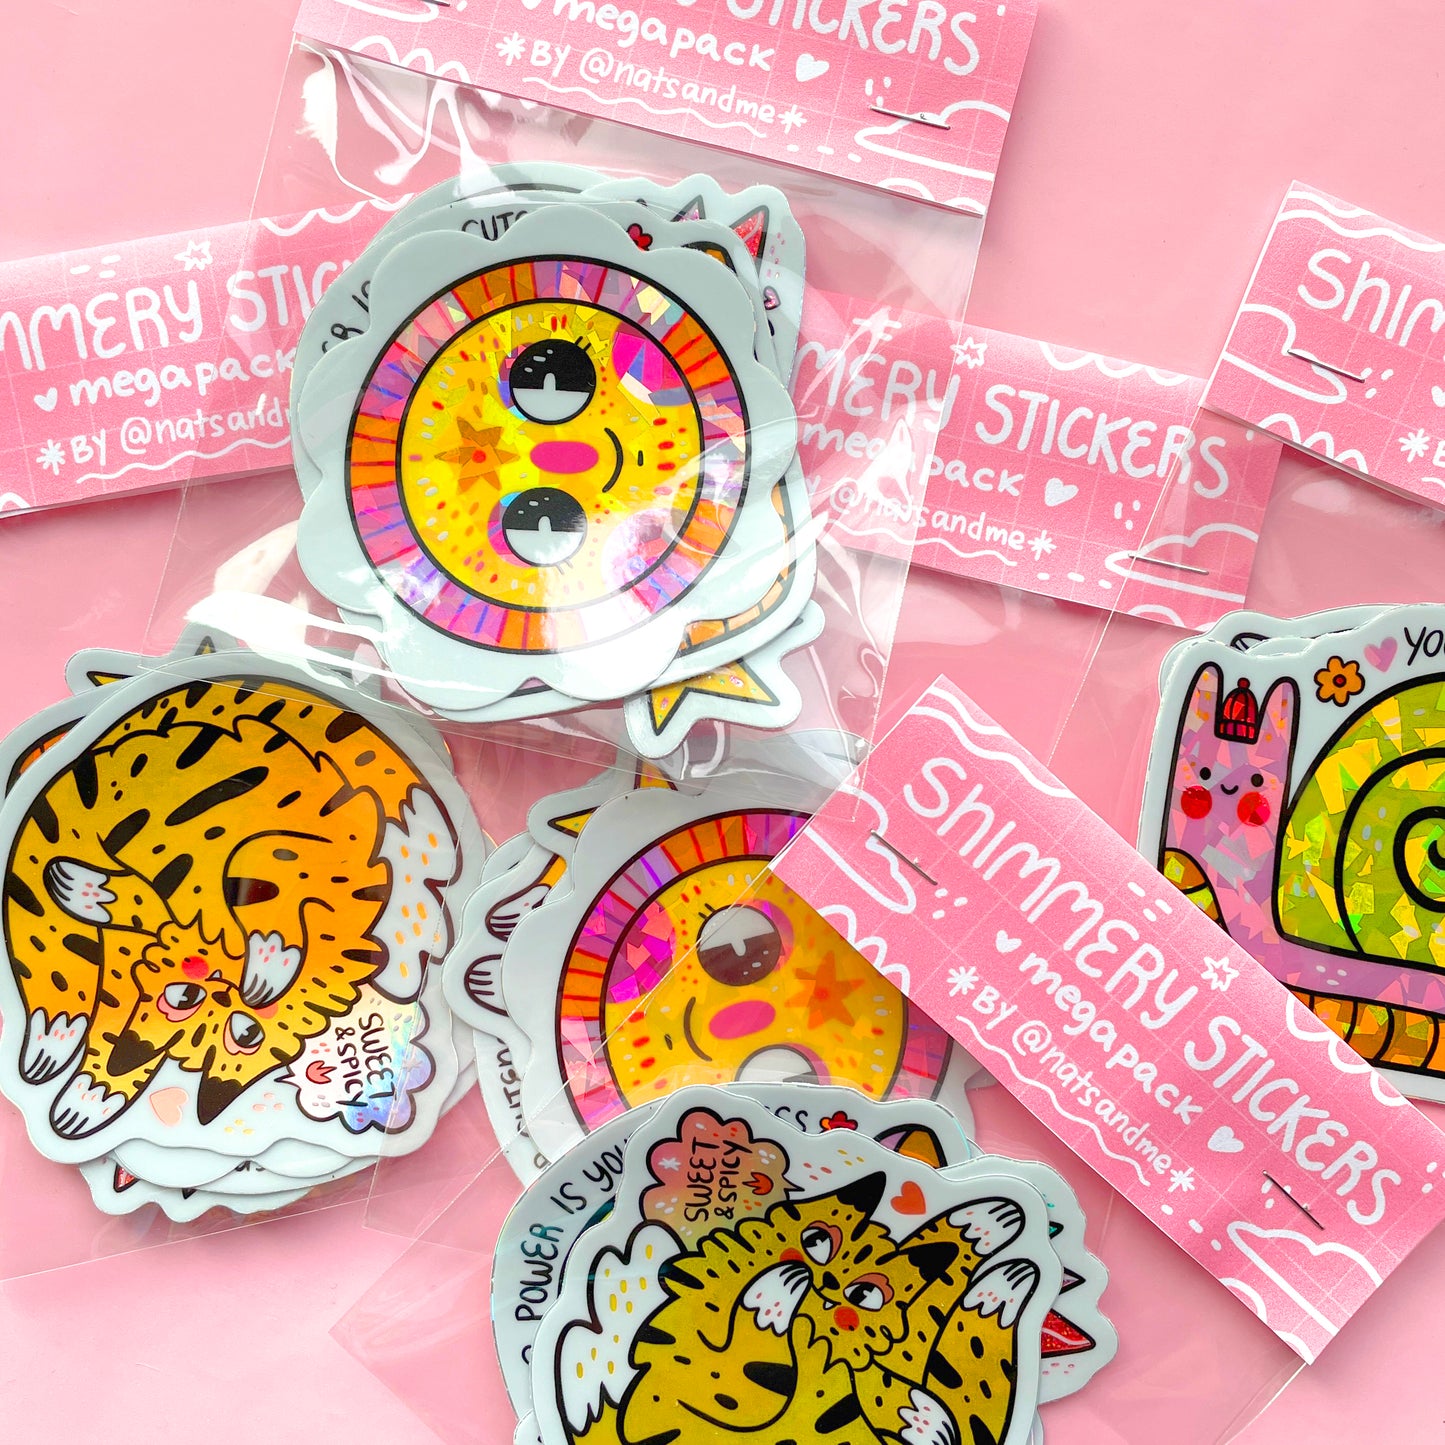 Mega Pack ✷Shimmery Stickers✷